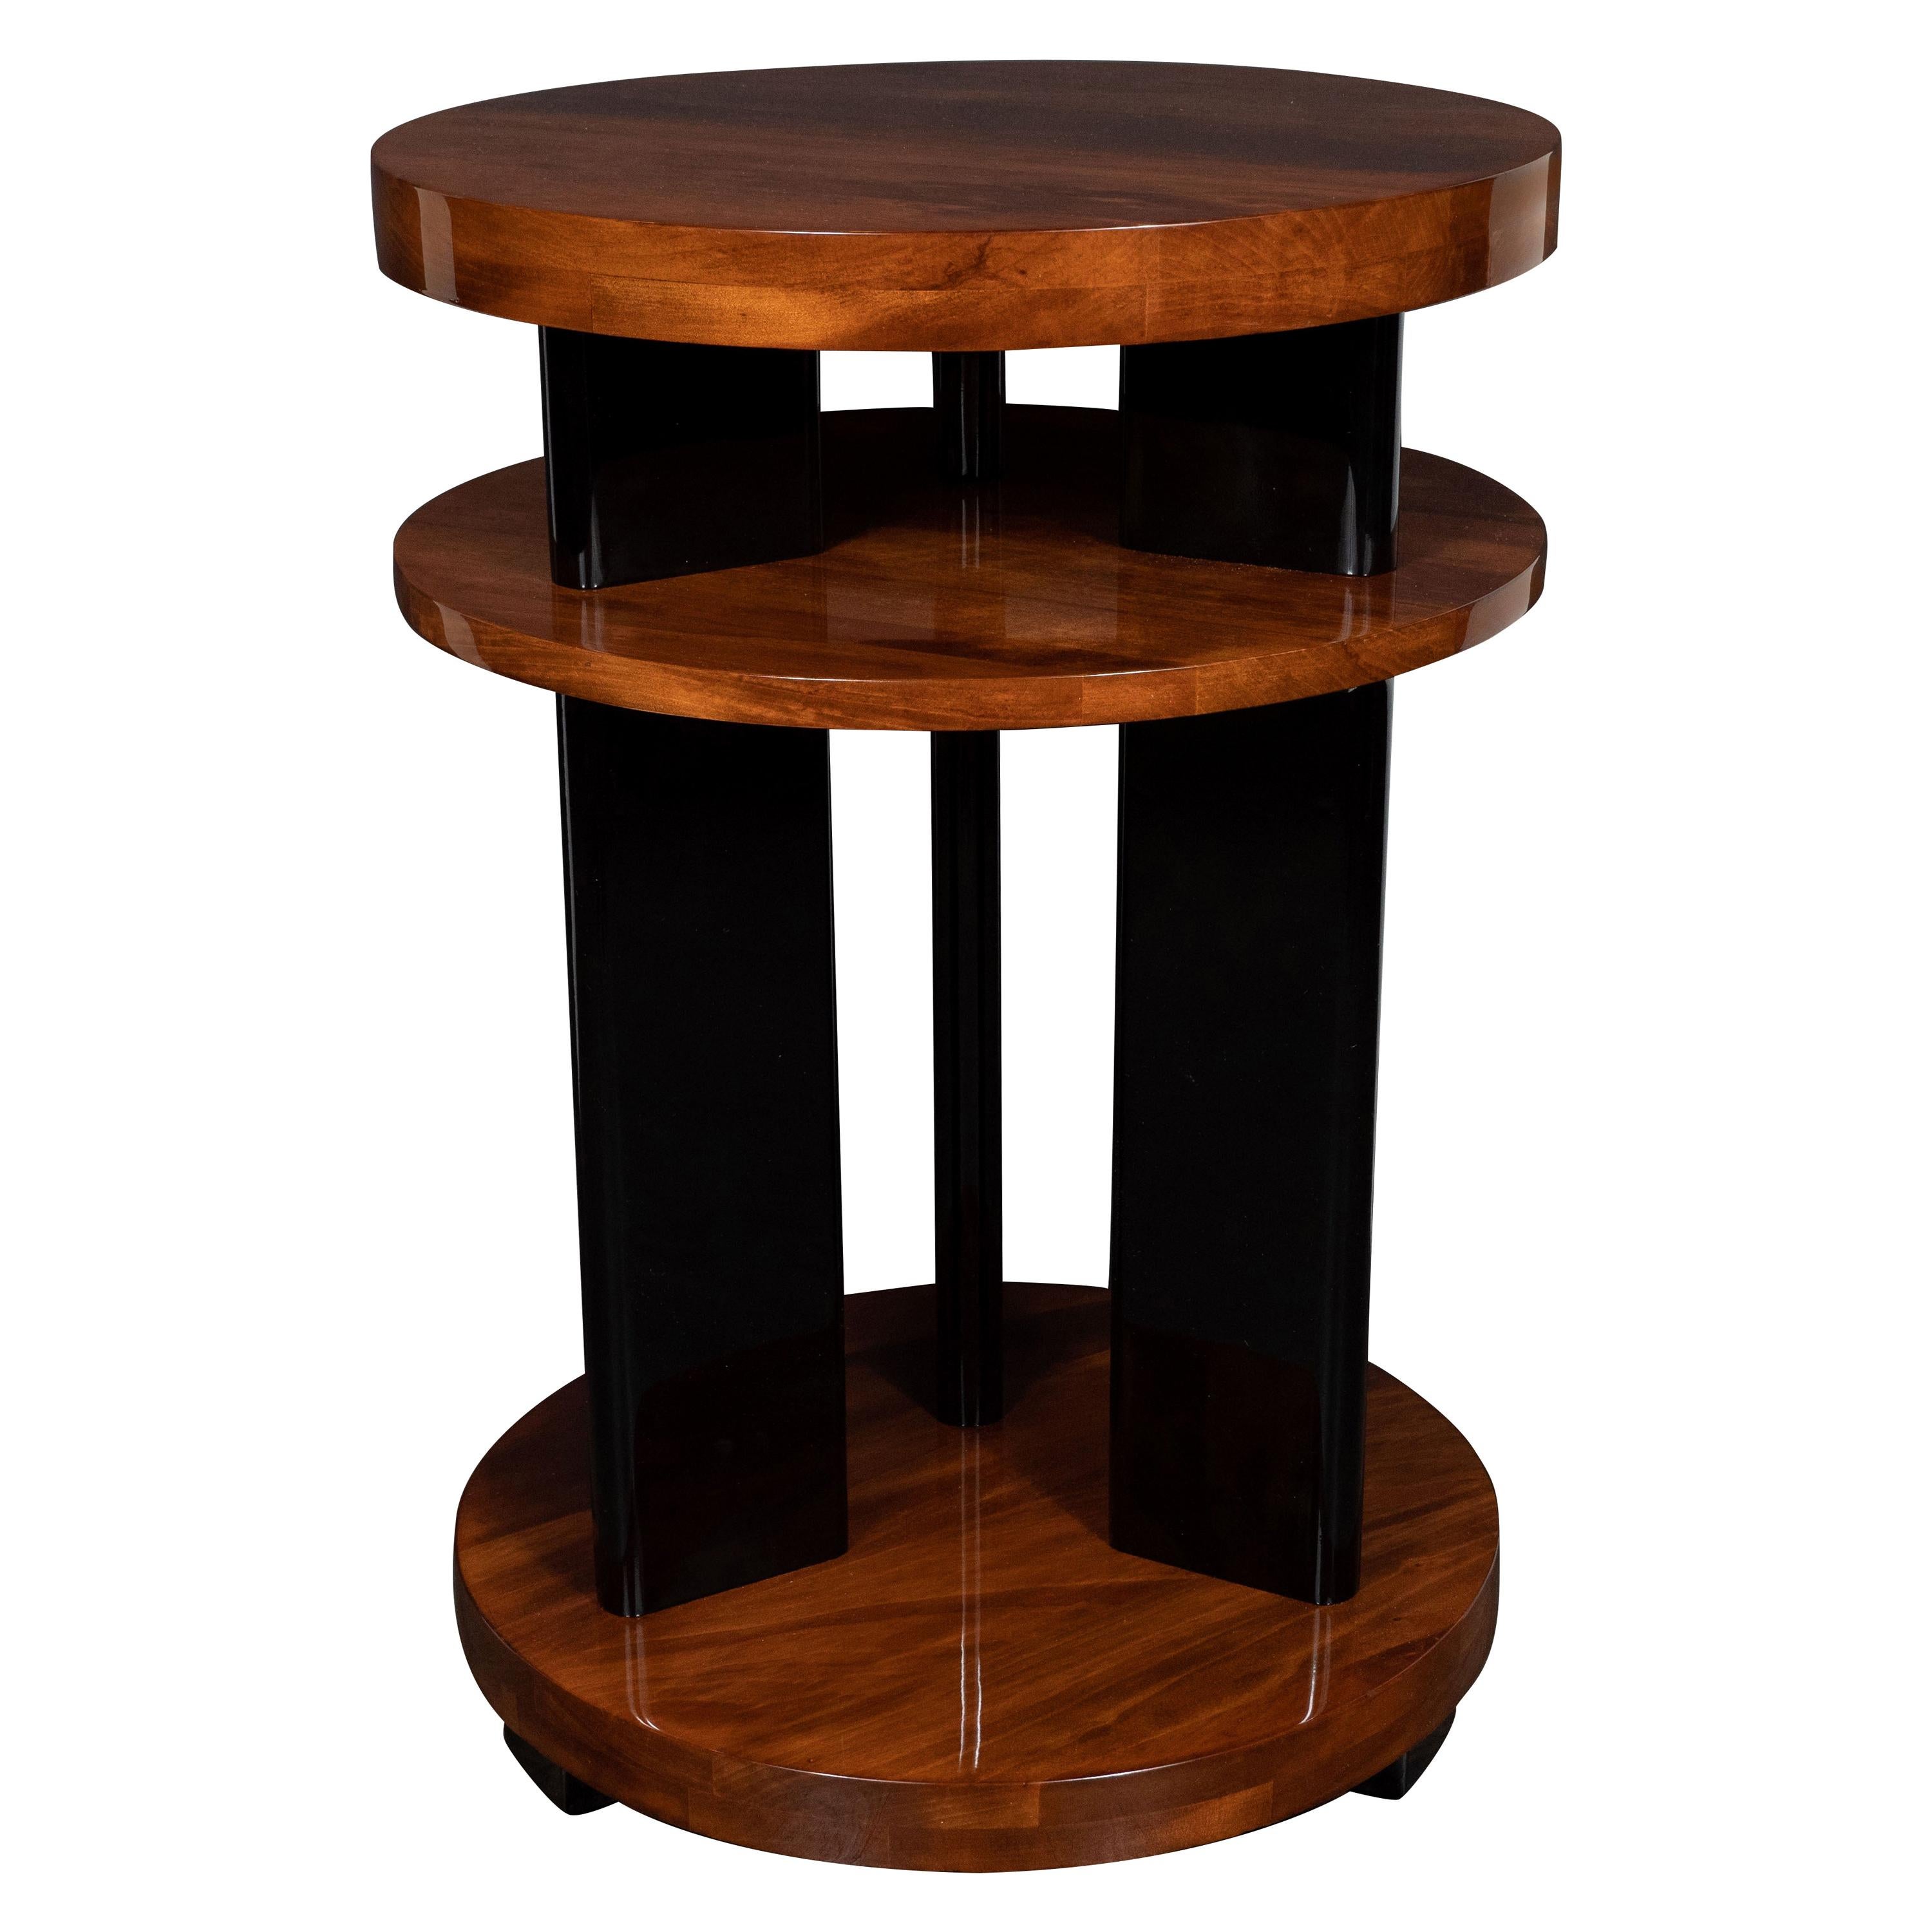 Art Deco Machine Age Three-Tier Bookmatched Walnut and Black Lacquer Side Table